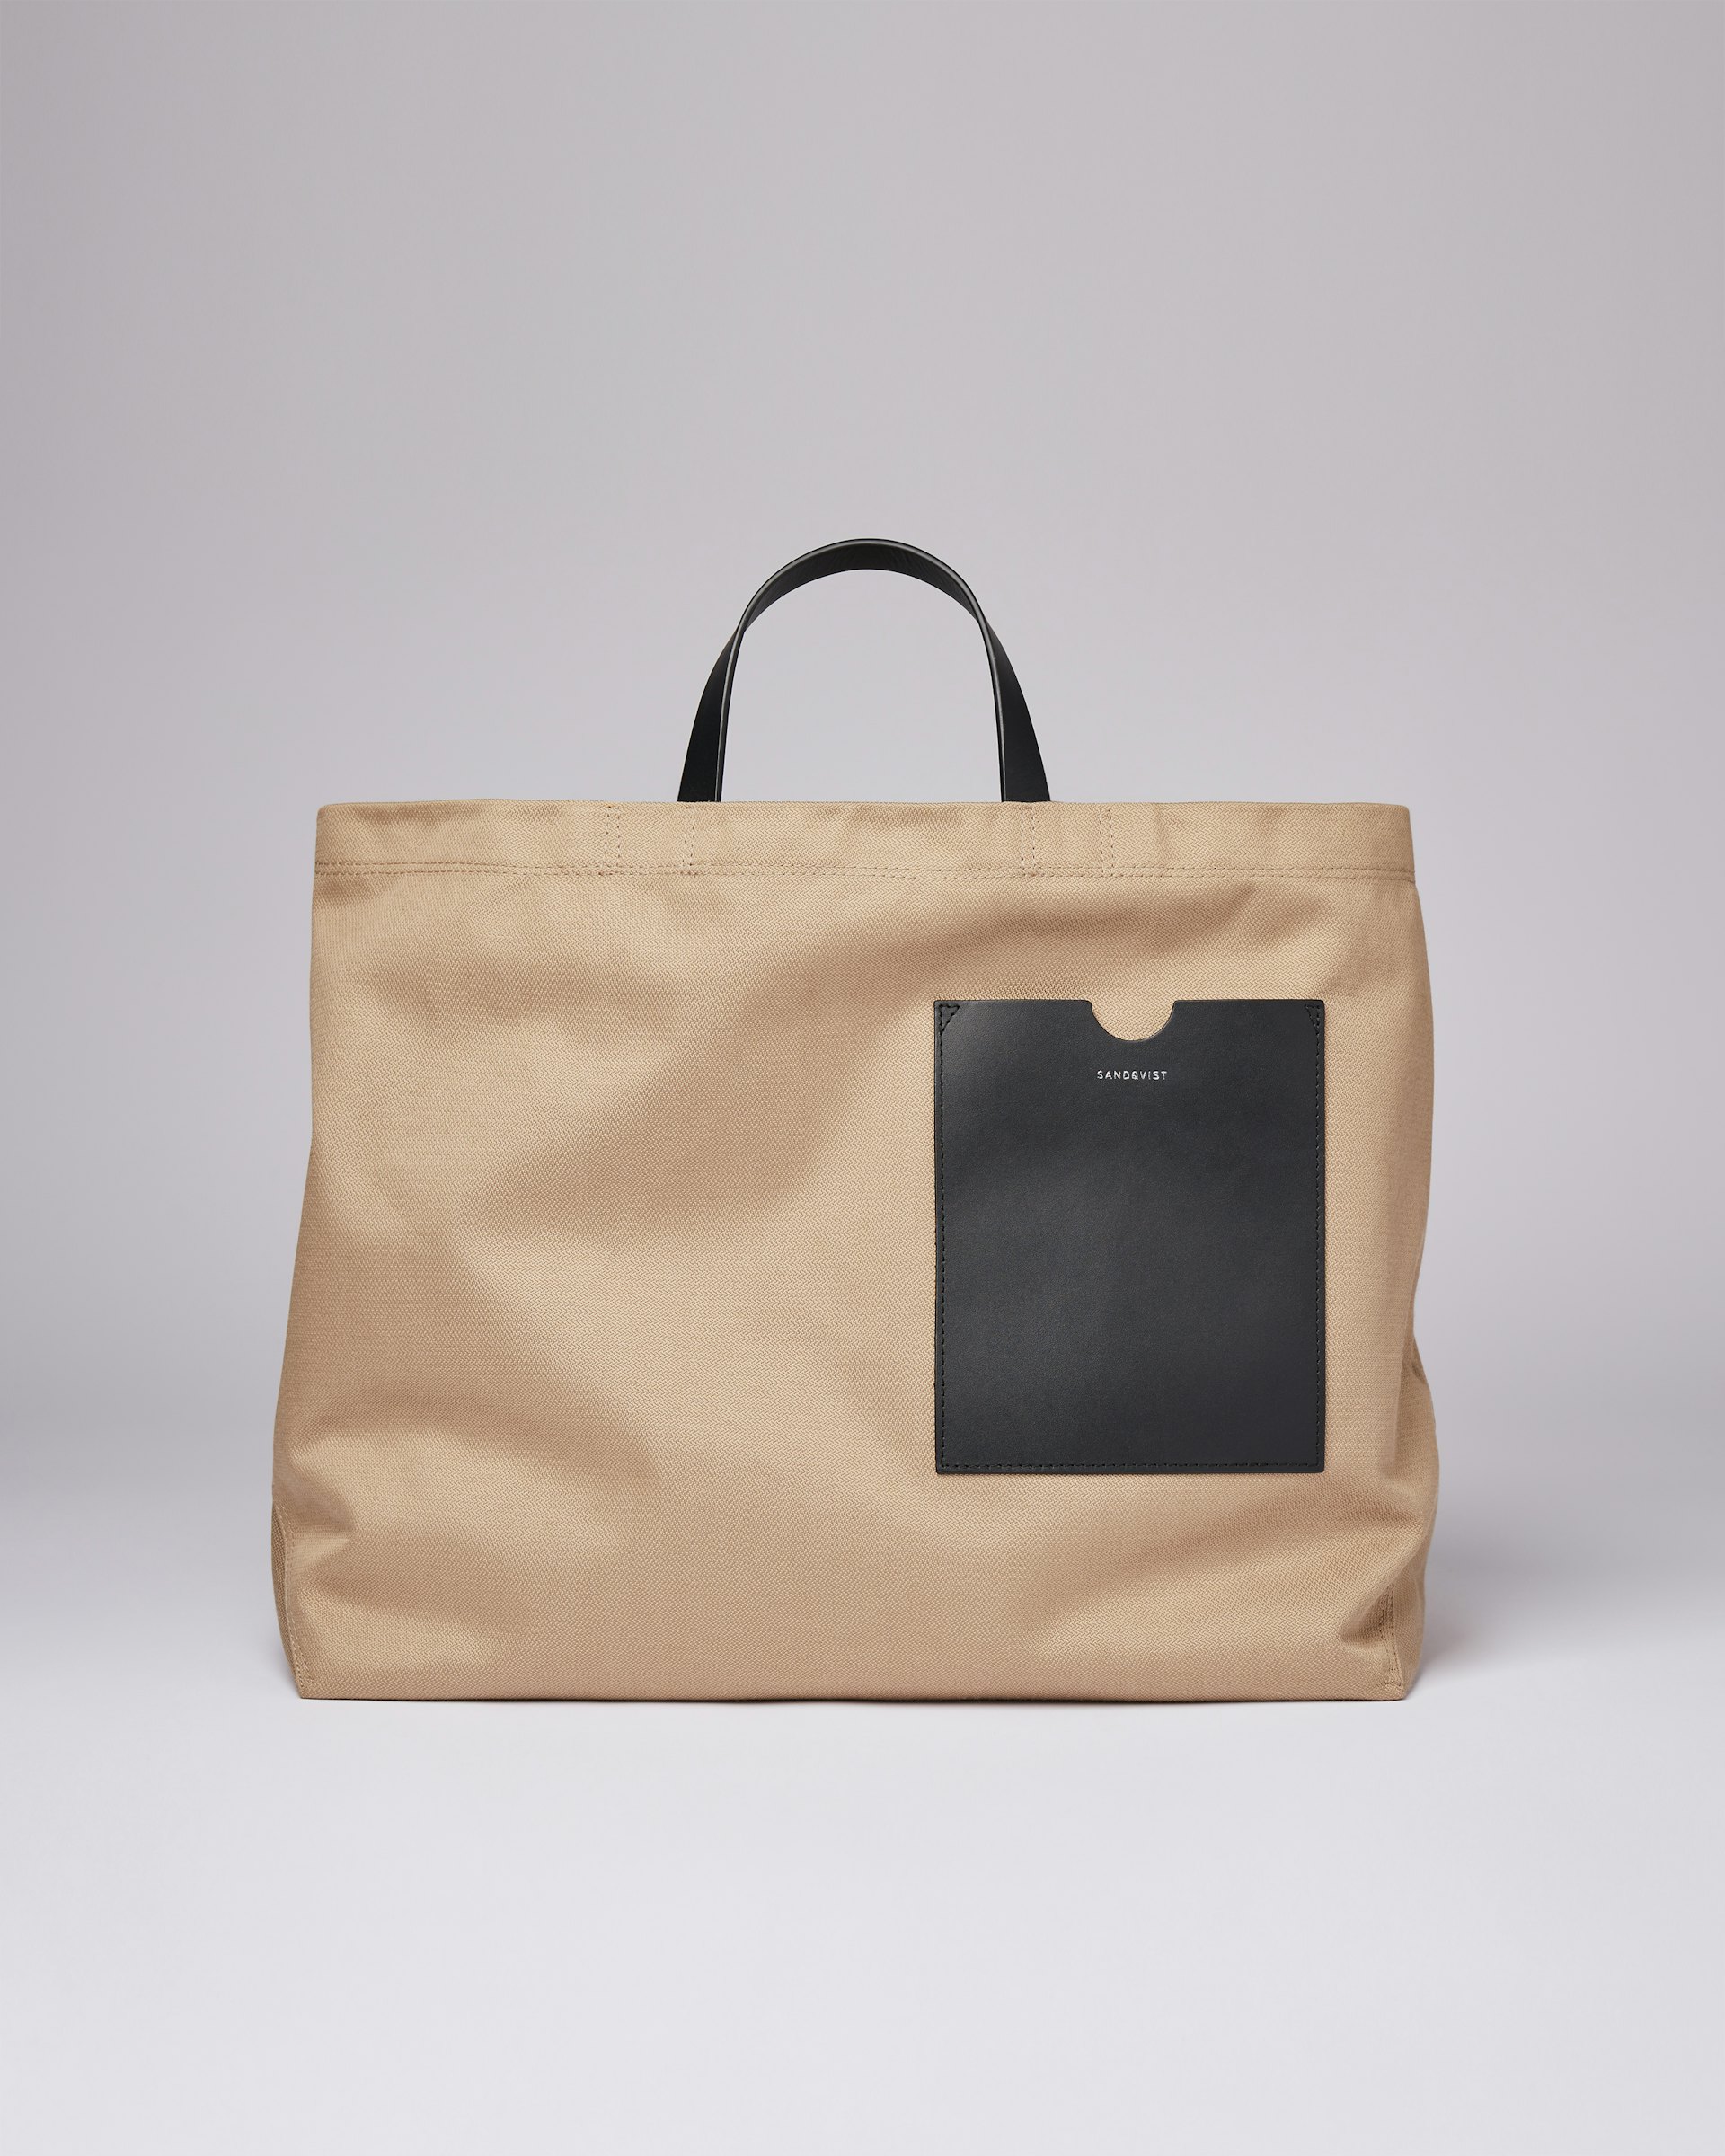 Agnes belongs to the category Tote bags and is in color black